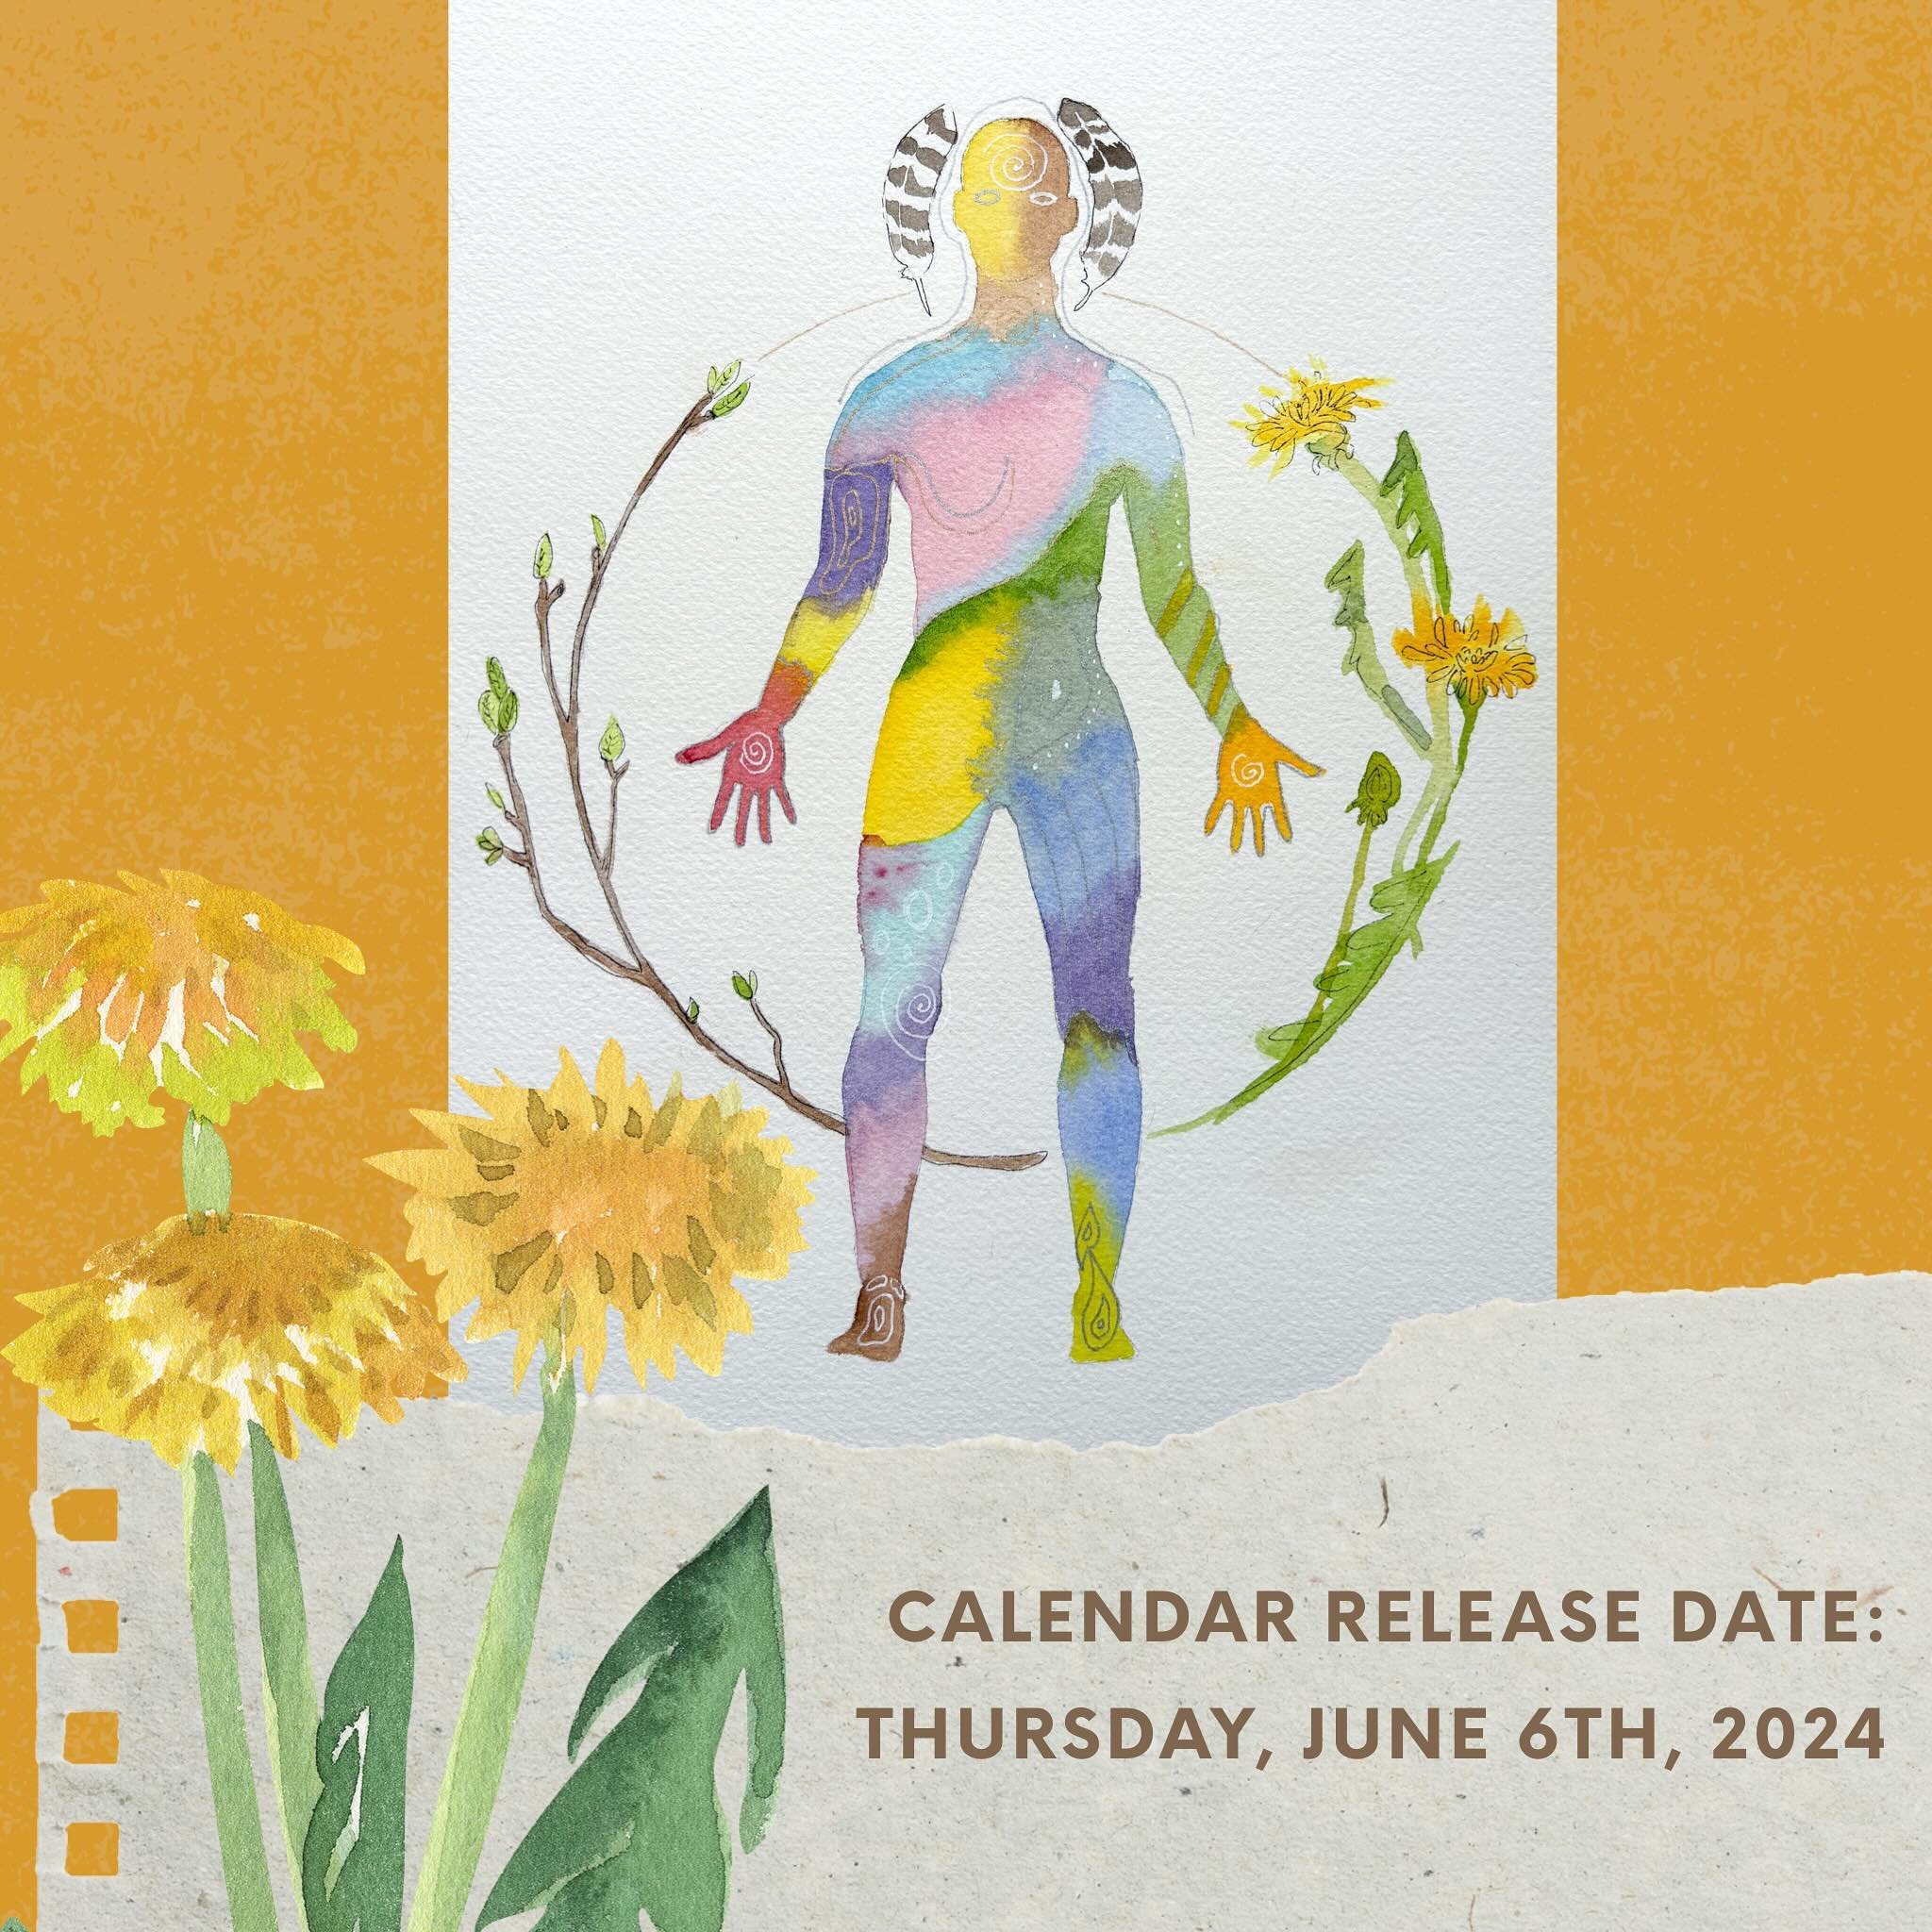 Hello, dear ones. To welcome in Summer, I&rsquo;ll be releasing the remainder of my 2024 calendar (July - December) on Thursday, June 6th. If you&rsquo;re signed up for my email notifications, you&rsquo;ll receive the link to book as soon as my calen